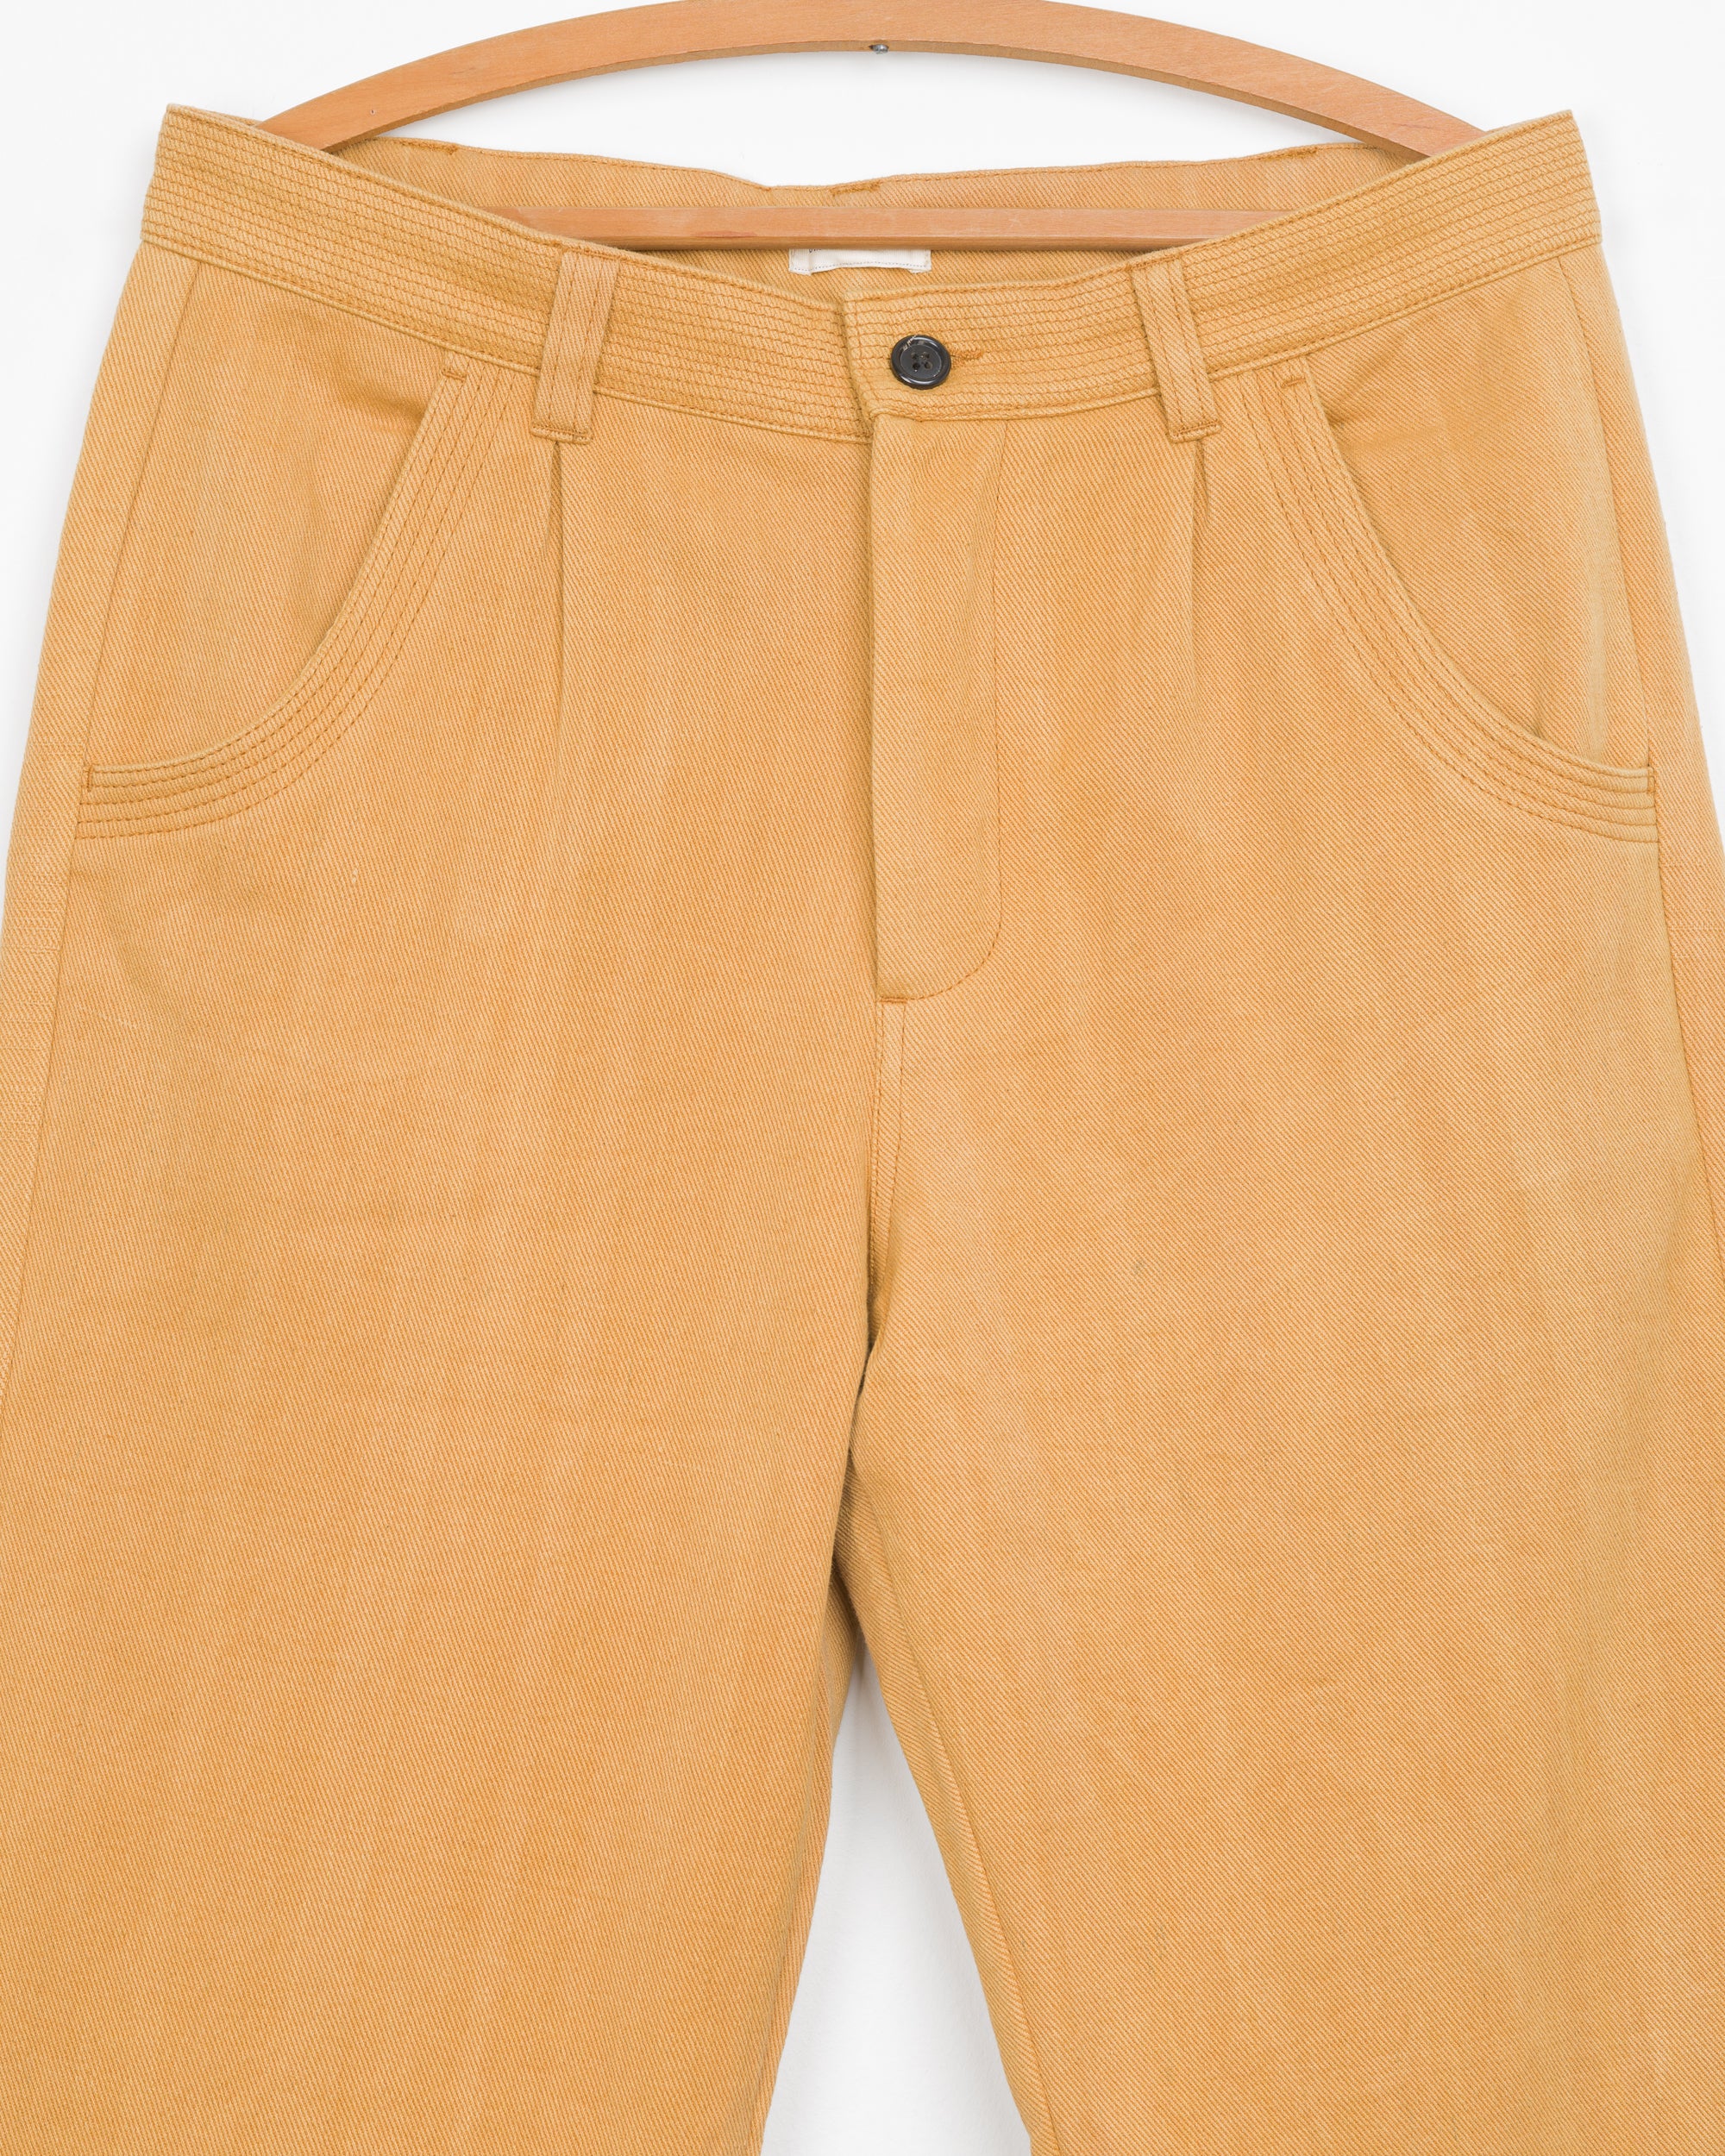 Veda Pant in Mustard Twill